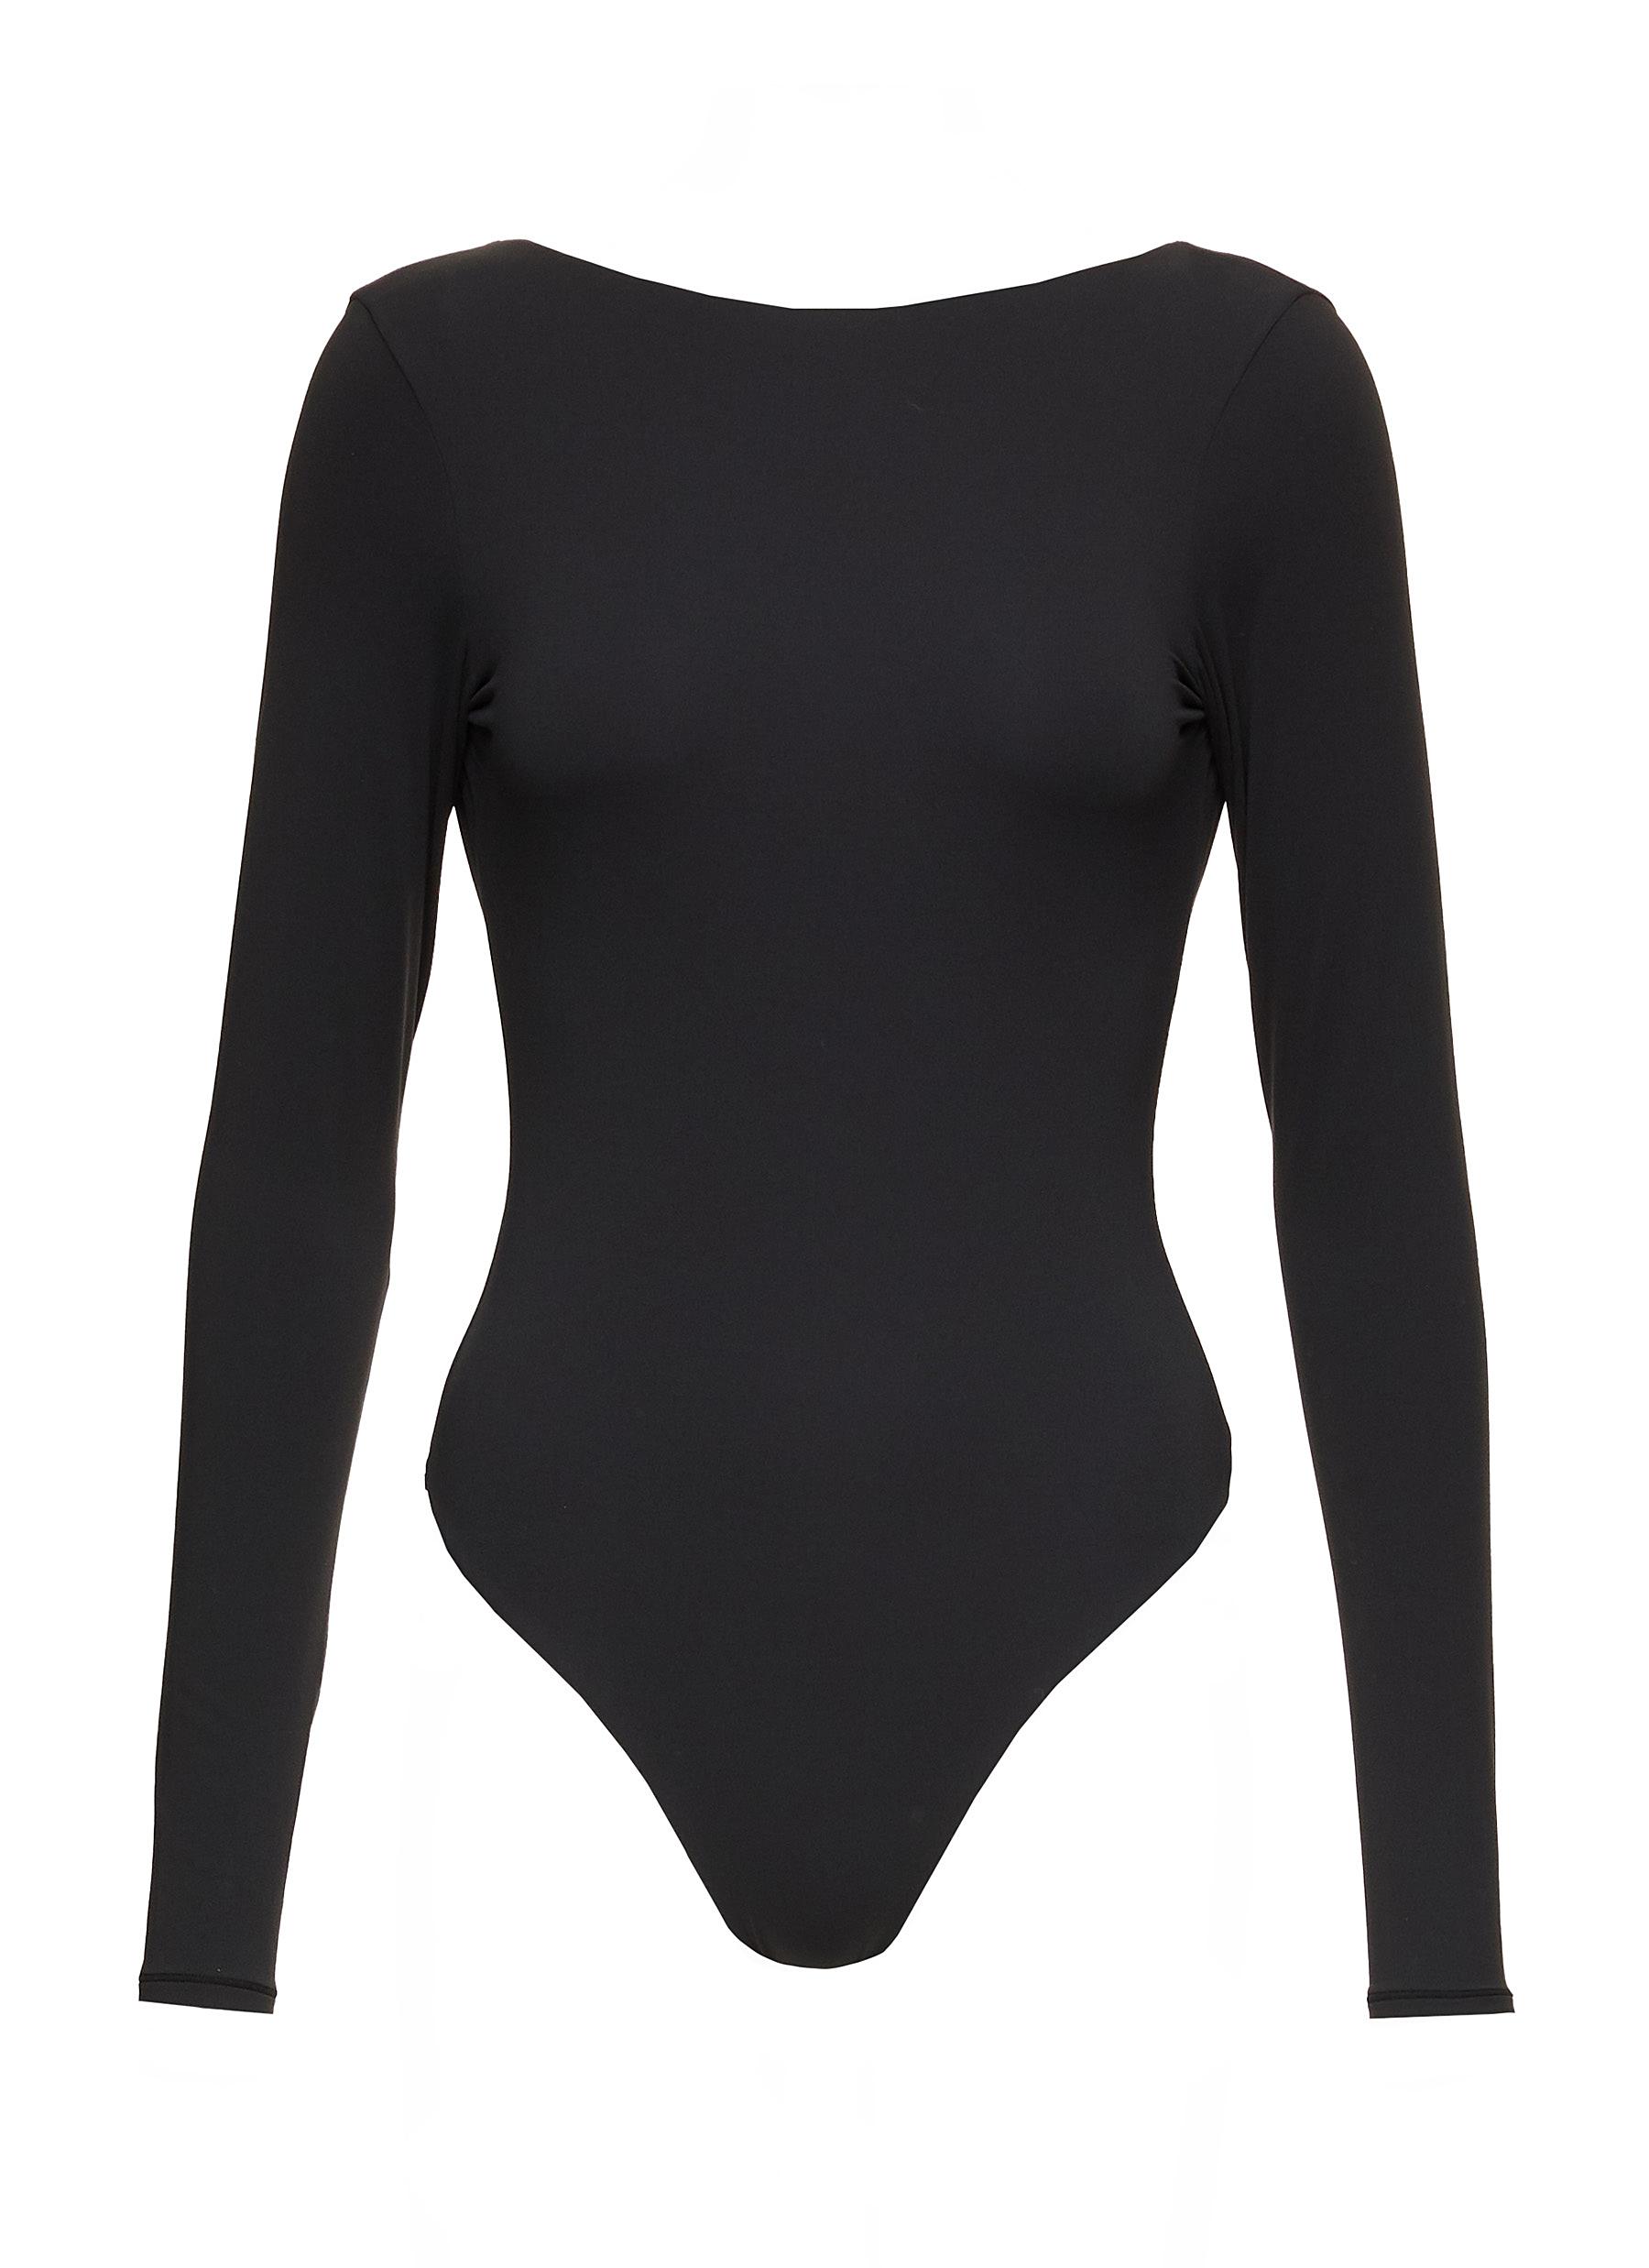 I found five  bodysuits that are fuller bust friendly and